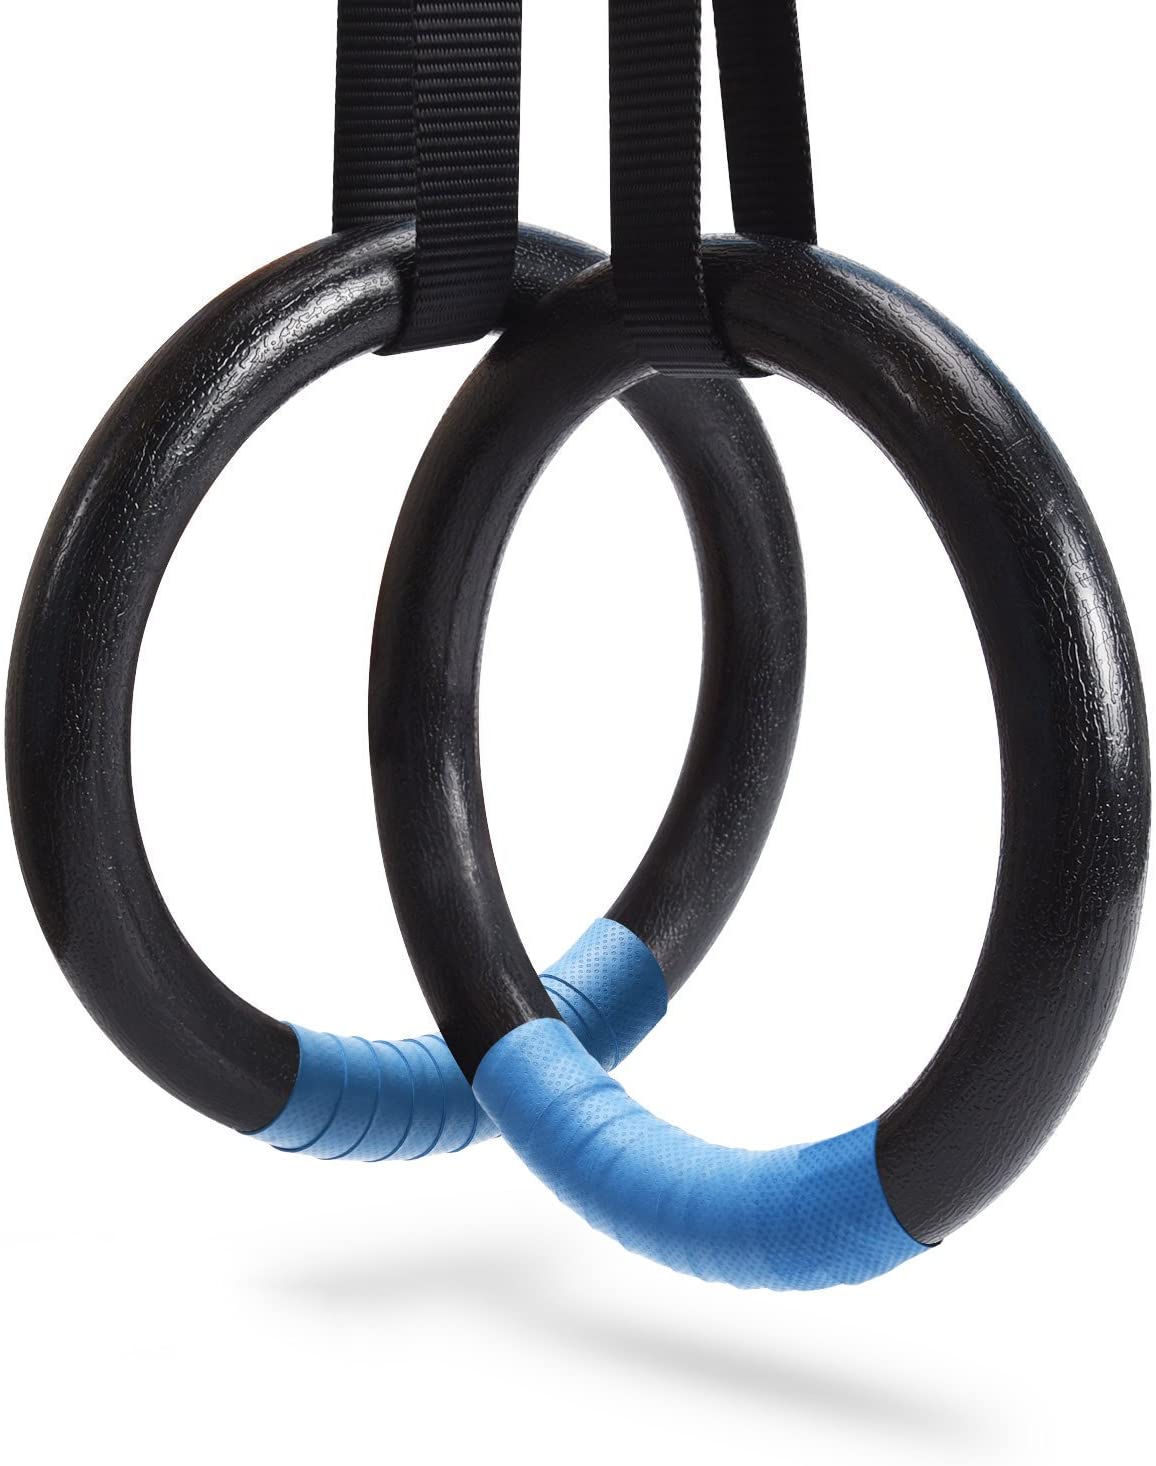 Workout Exercise Gymnastic Rings with Adjustable Straps All-in-One Suspension Trainer Straps QUOLIX Pull Up Rings with Non-slip Tape Grip Gymnastics Rings for Home Gym Training Calisthenic 